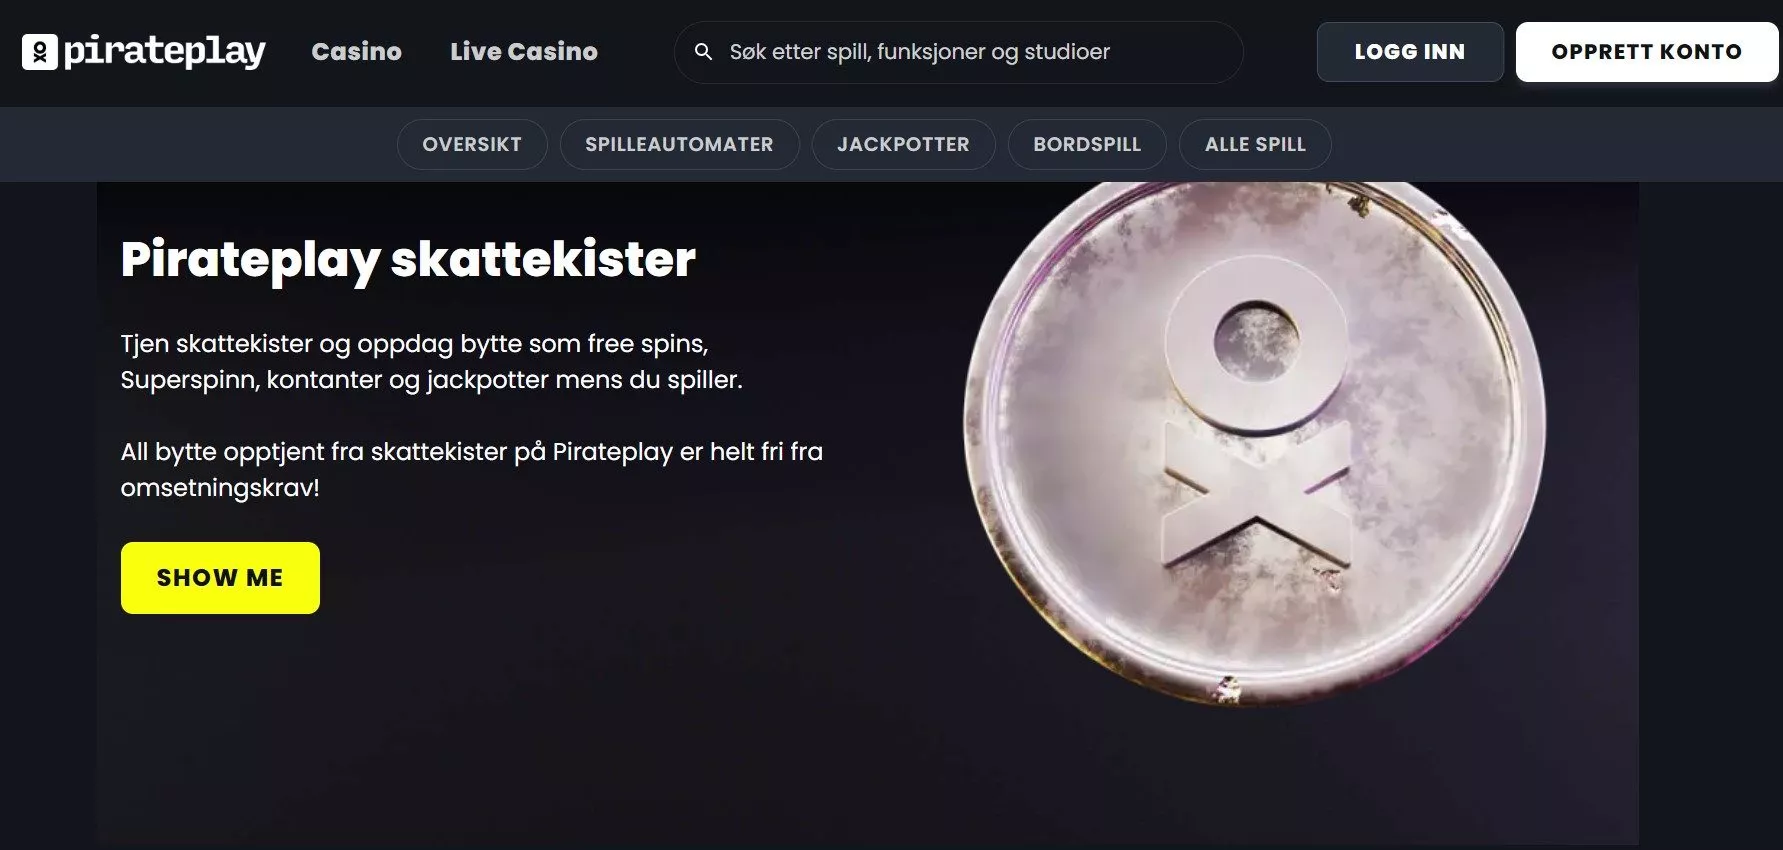 pirate play casino norge 3